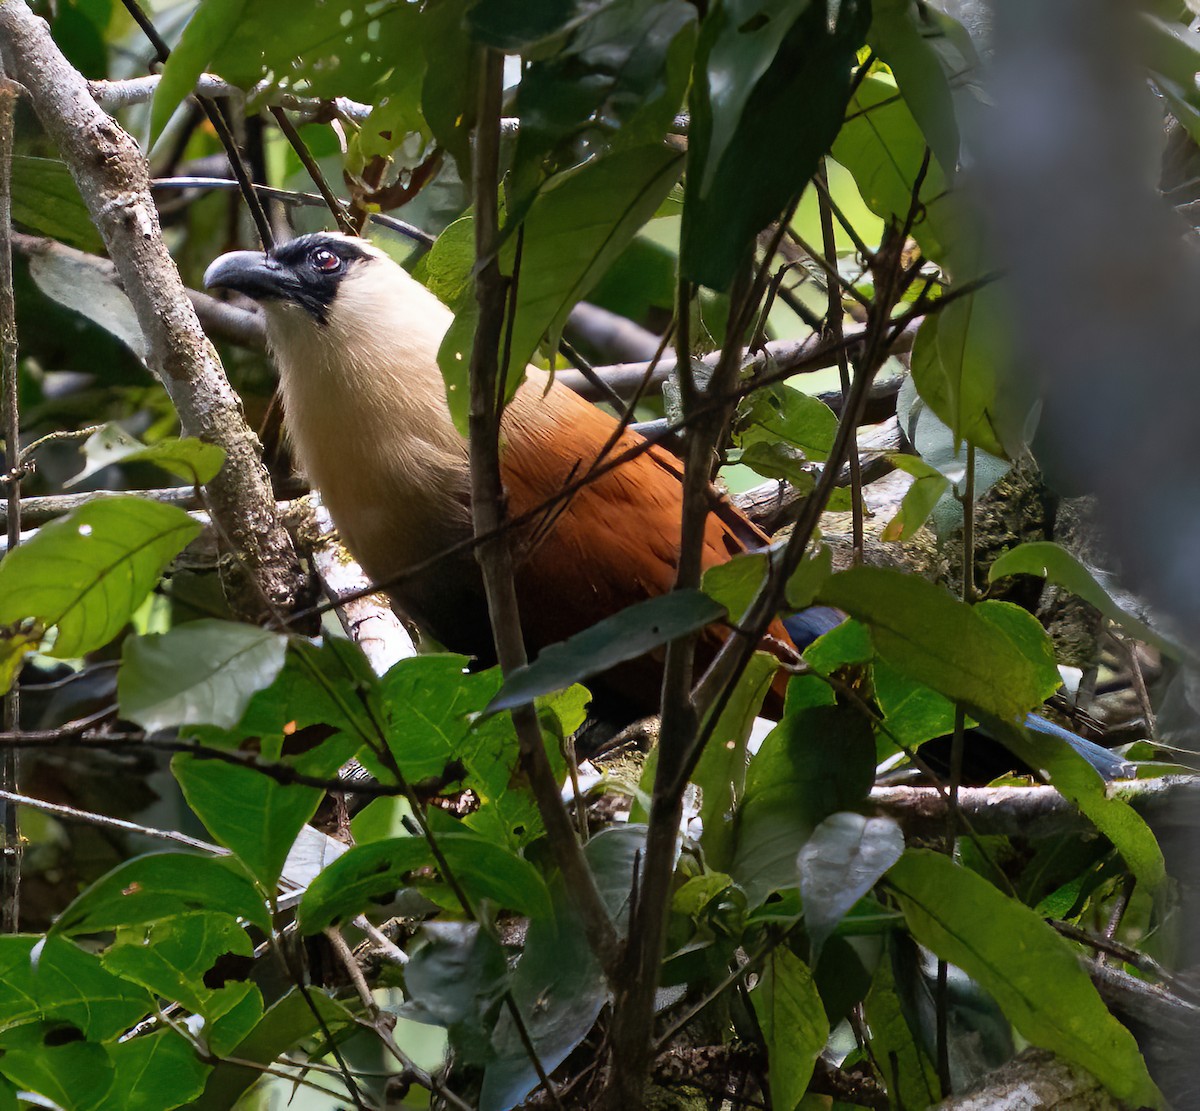 Black-faced Coucal - Kevin Pearce